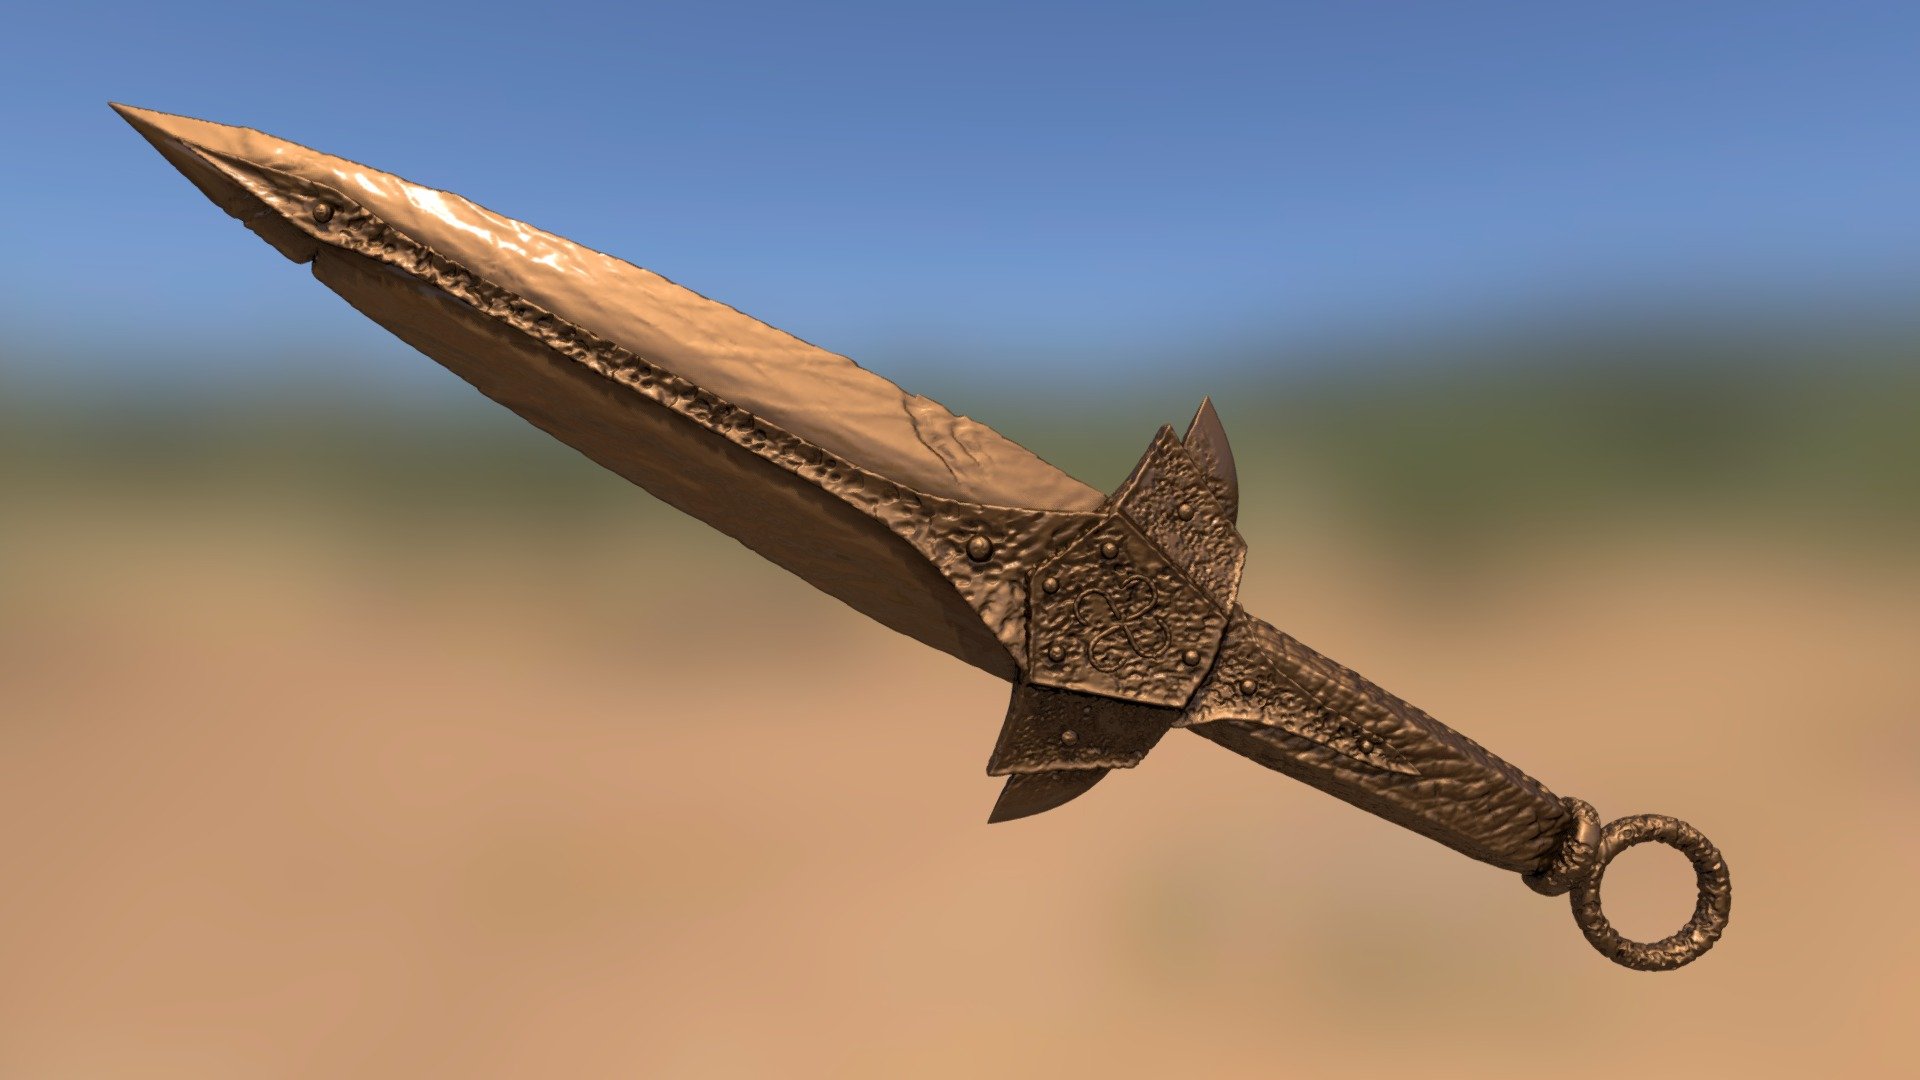 skyrim dragon scale weapons